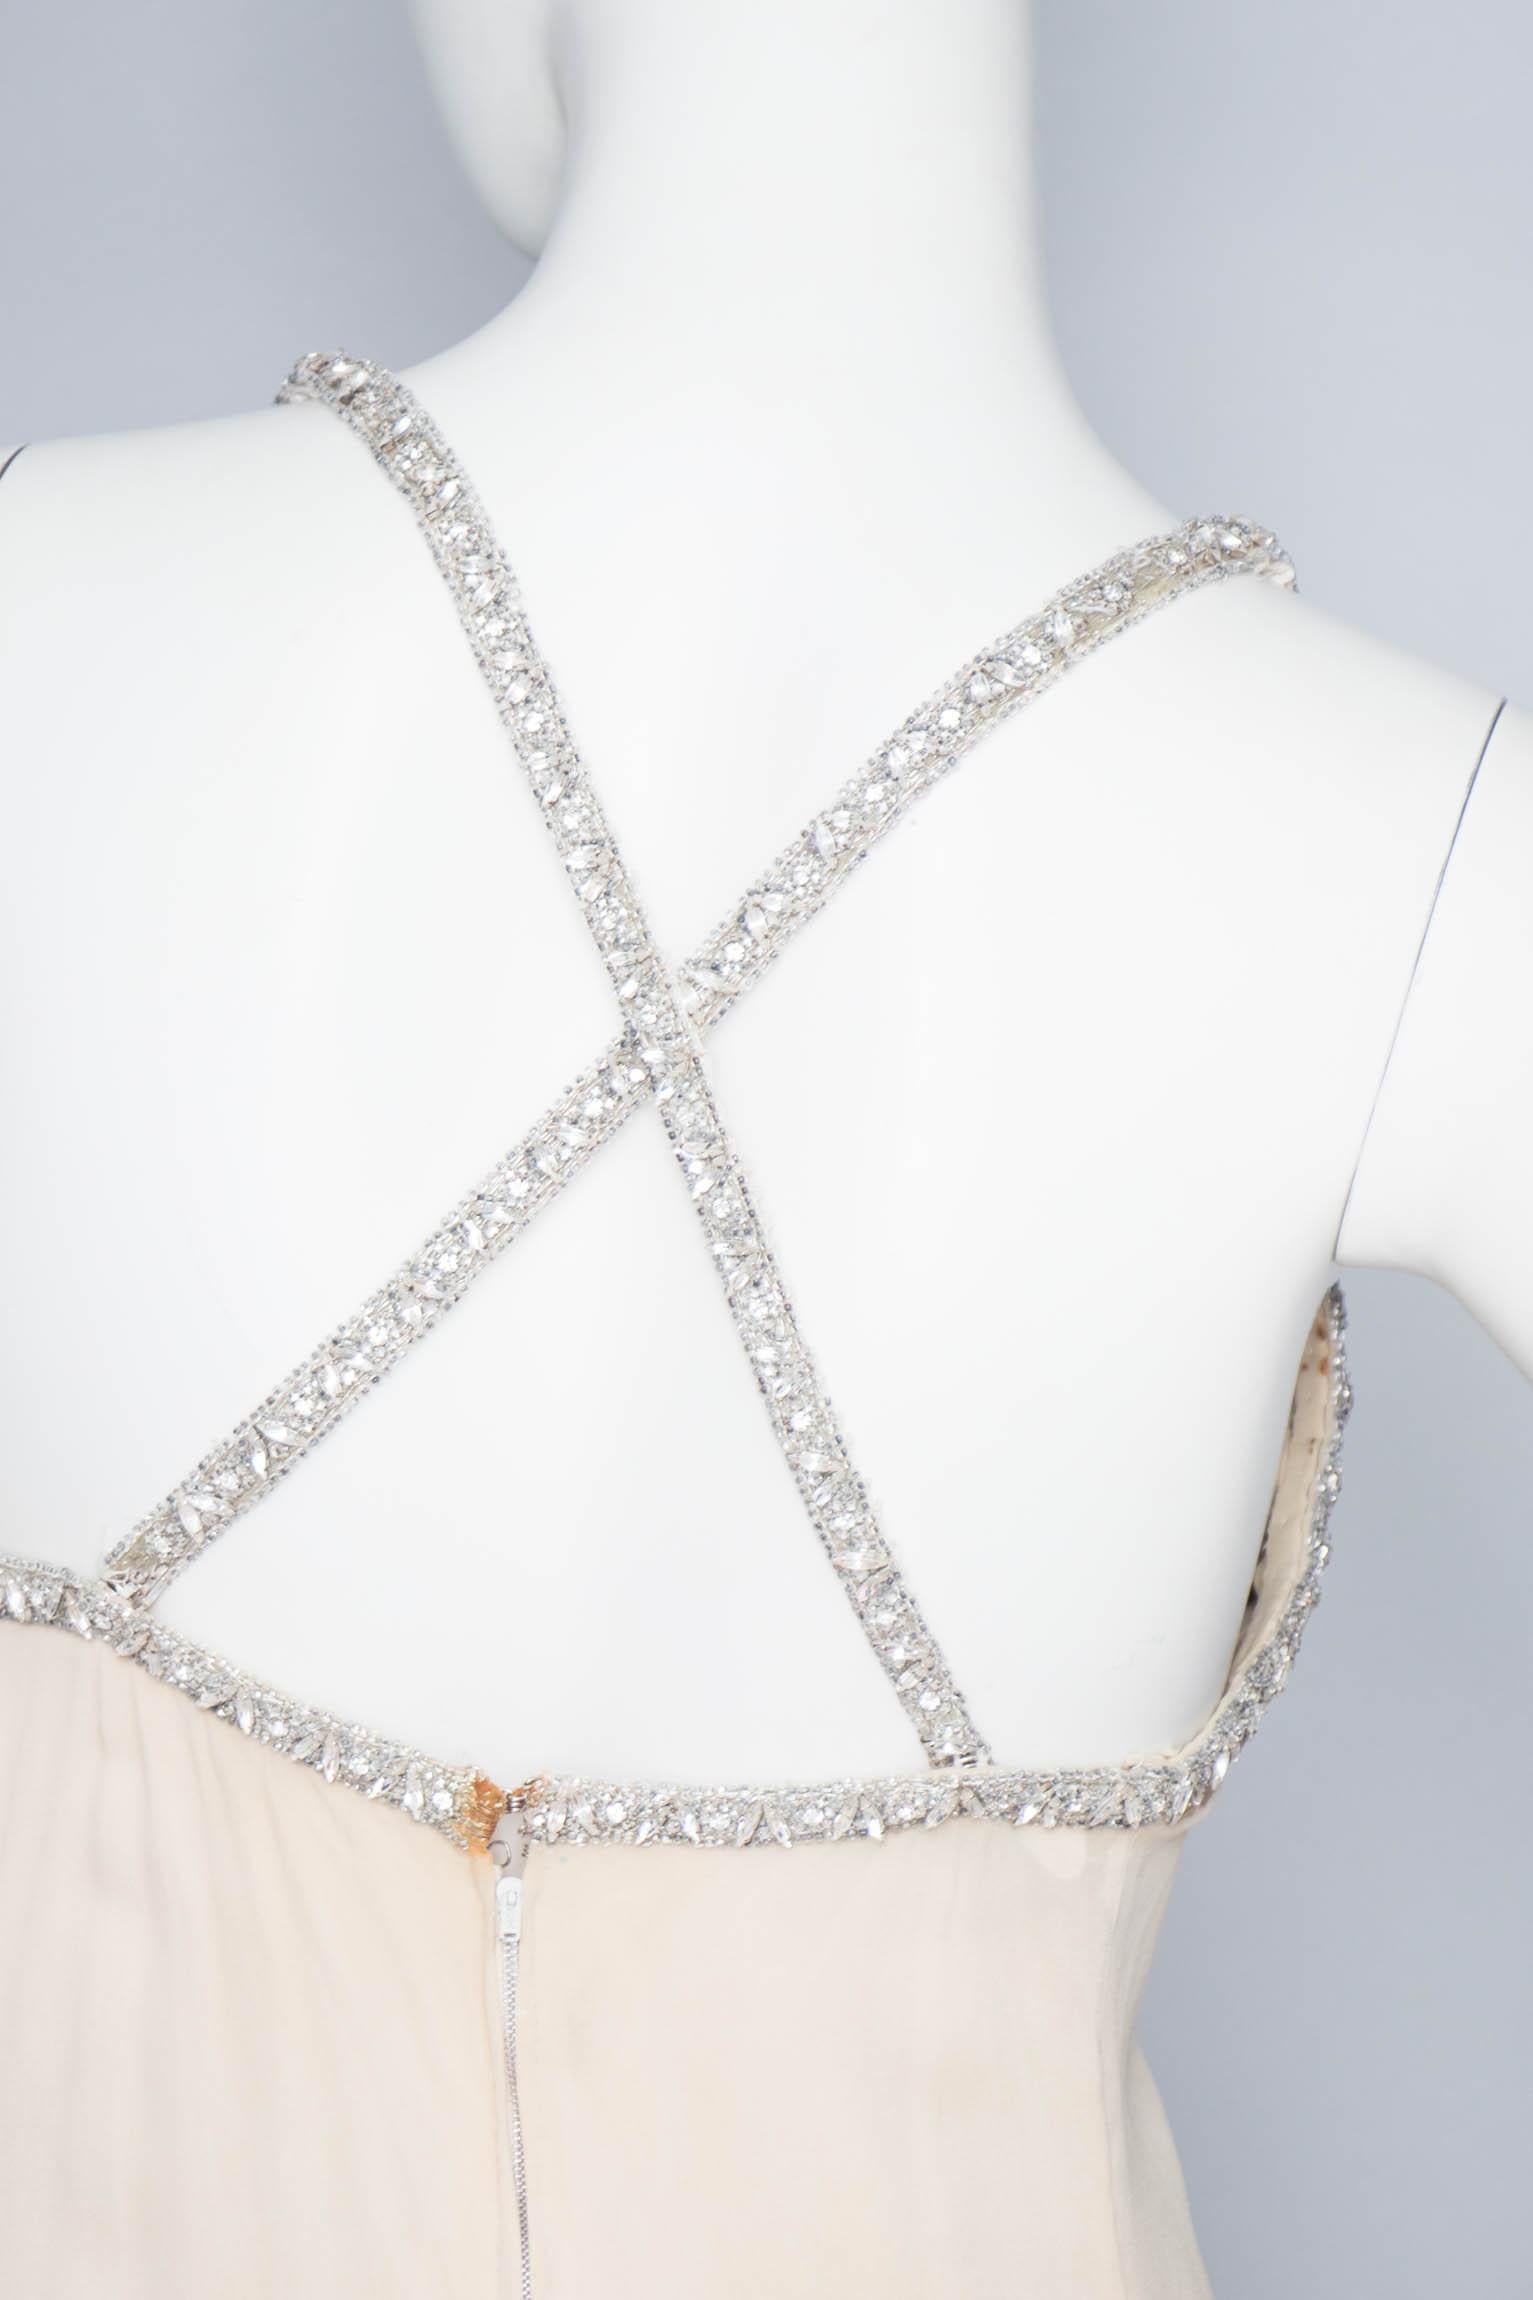 An Incredible 1960s Vintage Christian Dior Couture Silk Dress w. Beading  For Sale 4